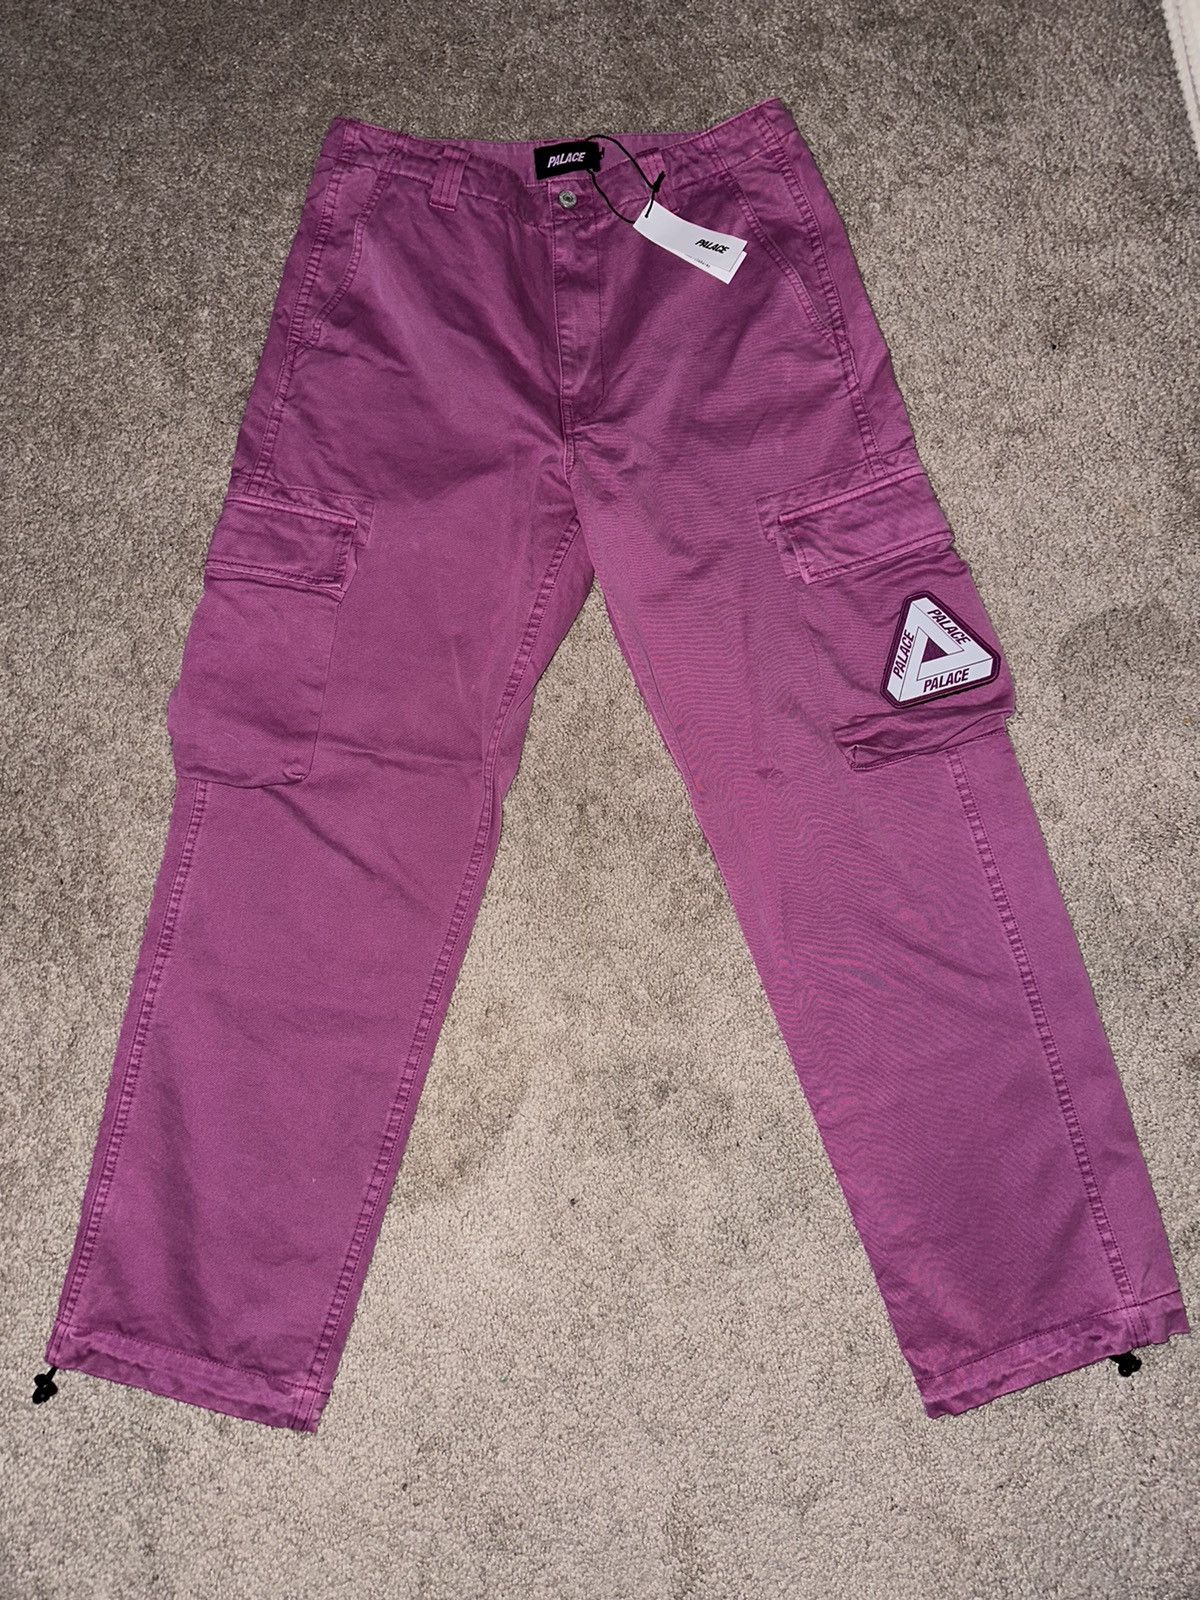 Vintage PALACE GARMENT dyed cargo trouser pant | Grailed